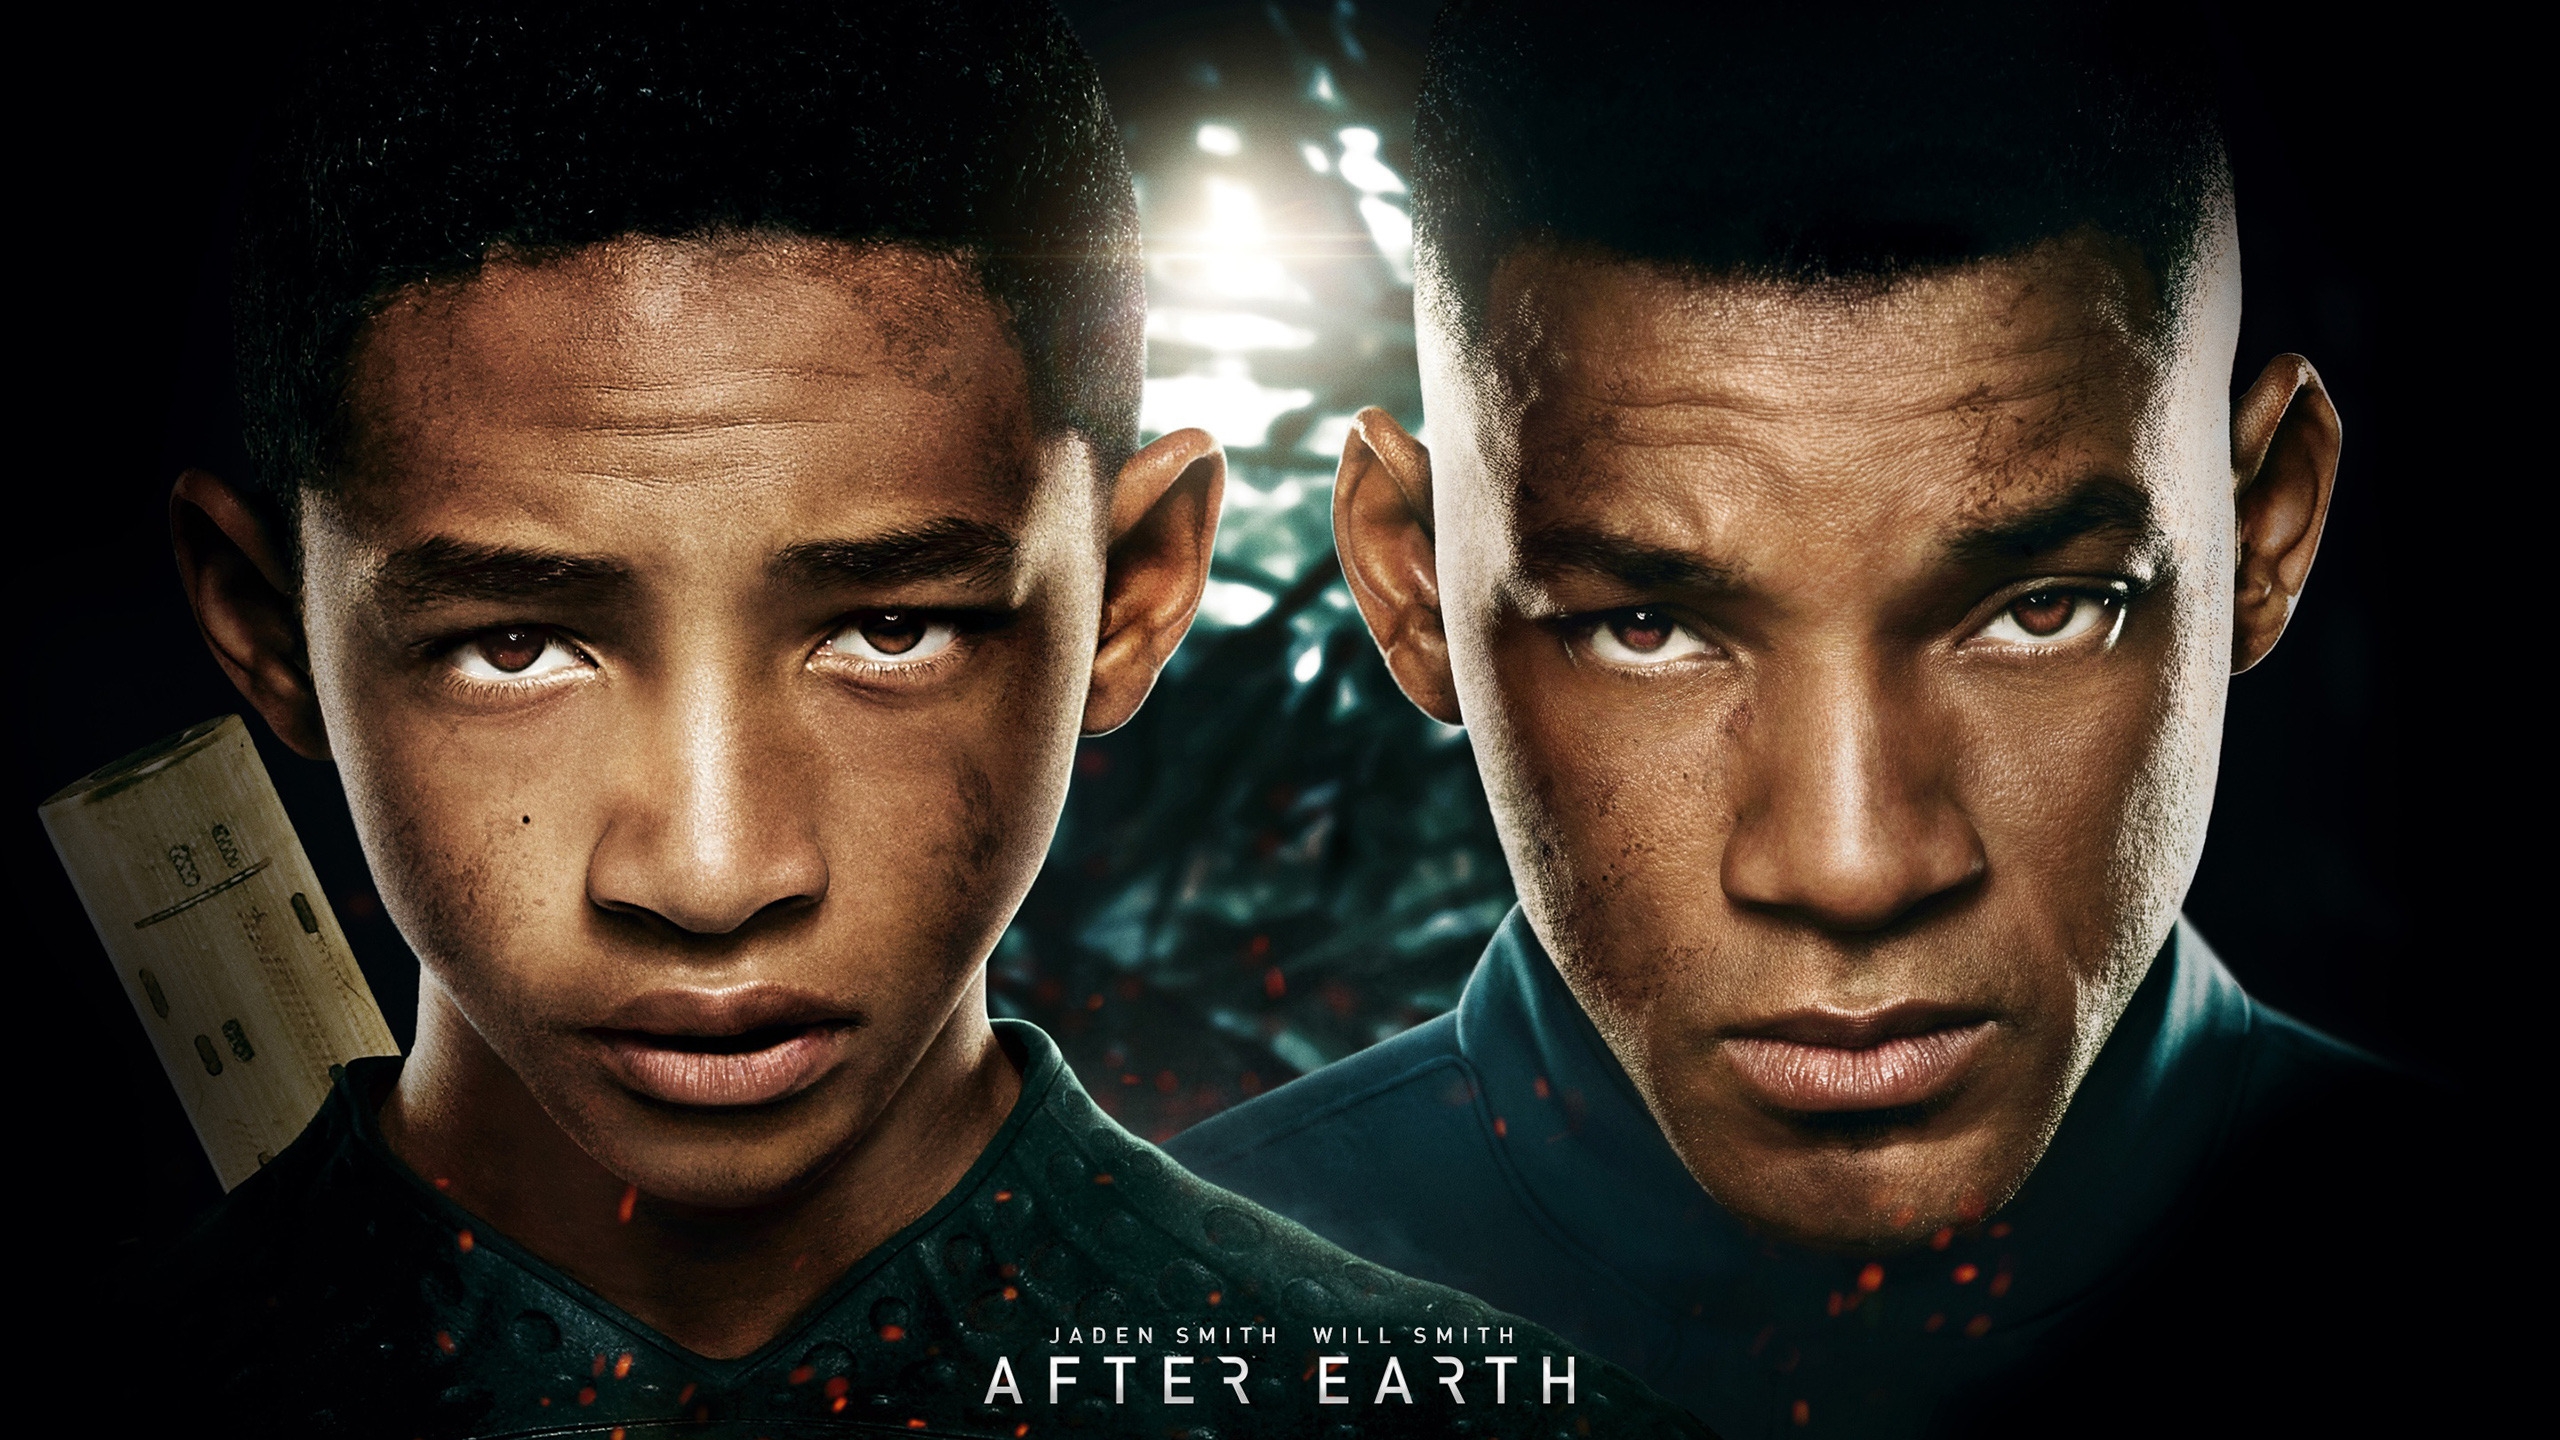 After Earth 2013 Movie for 2560x1440 HDTV resolution